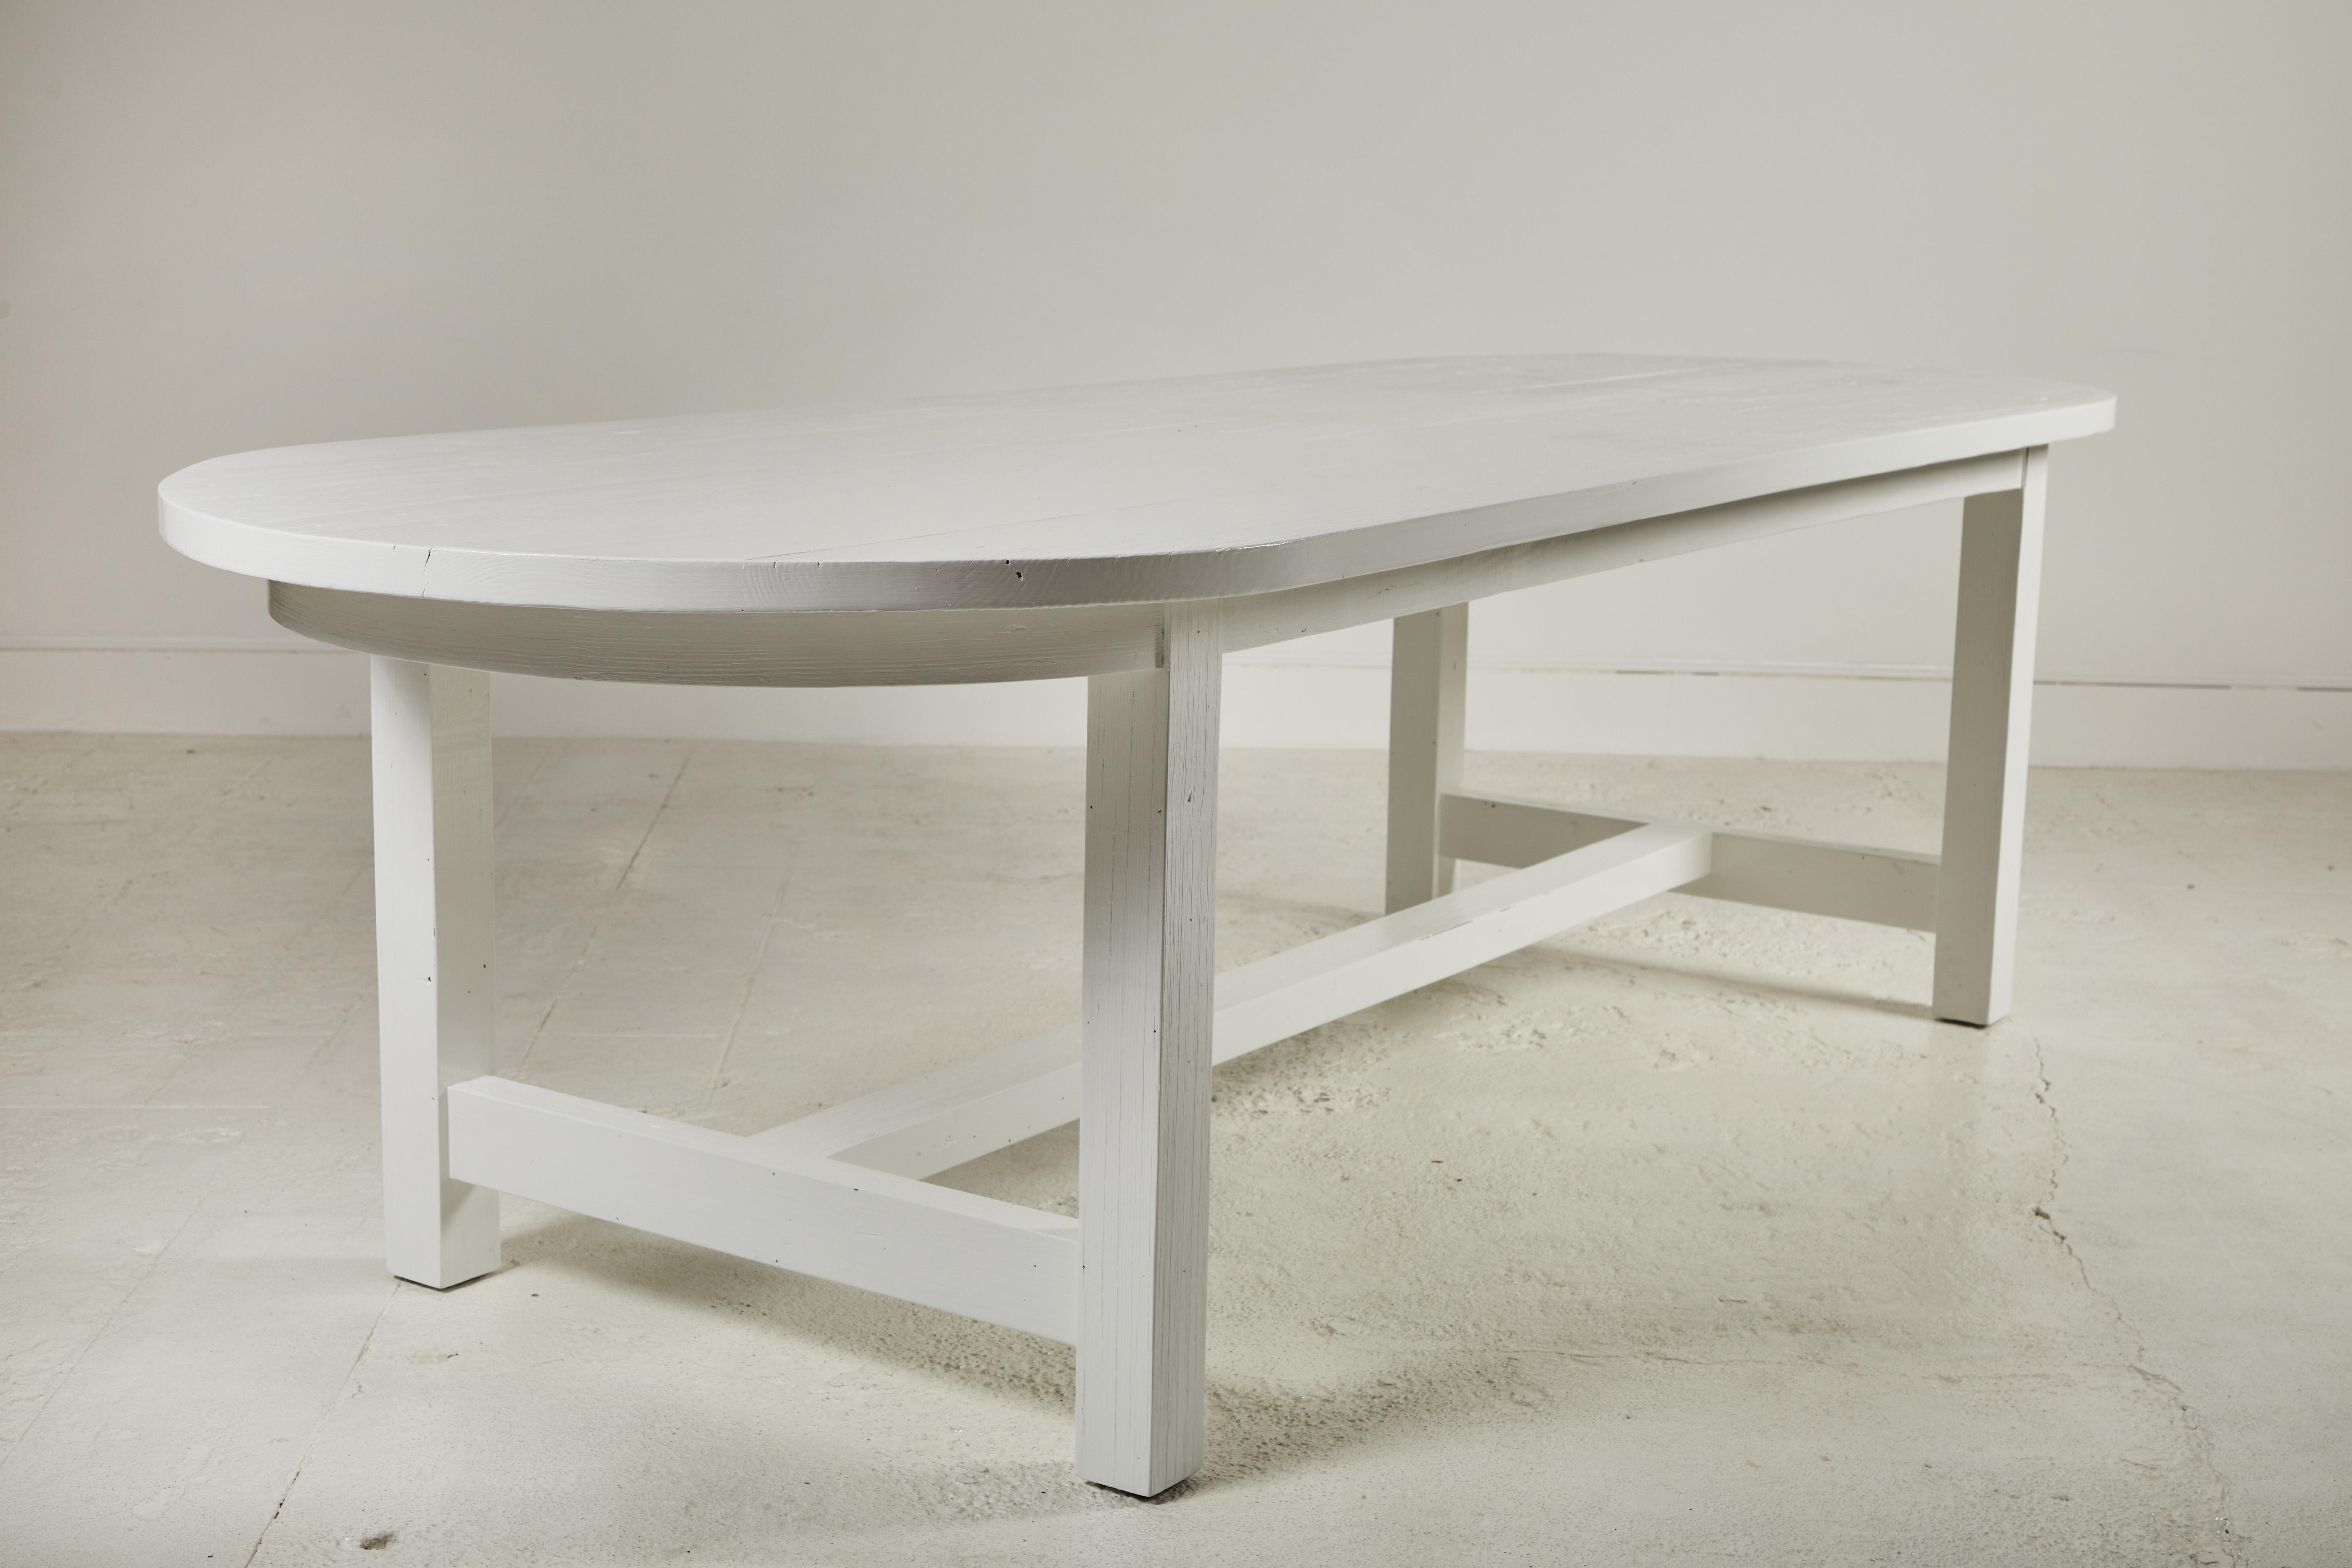 Pine Nickey Kehoe Collection White Painted Oval Harvest Dining Table